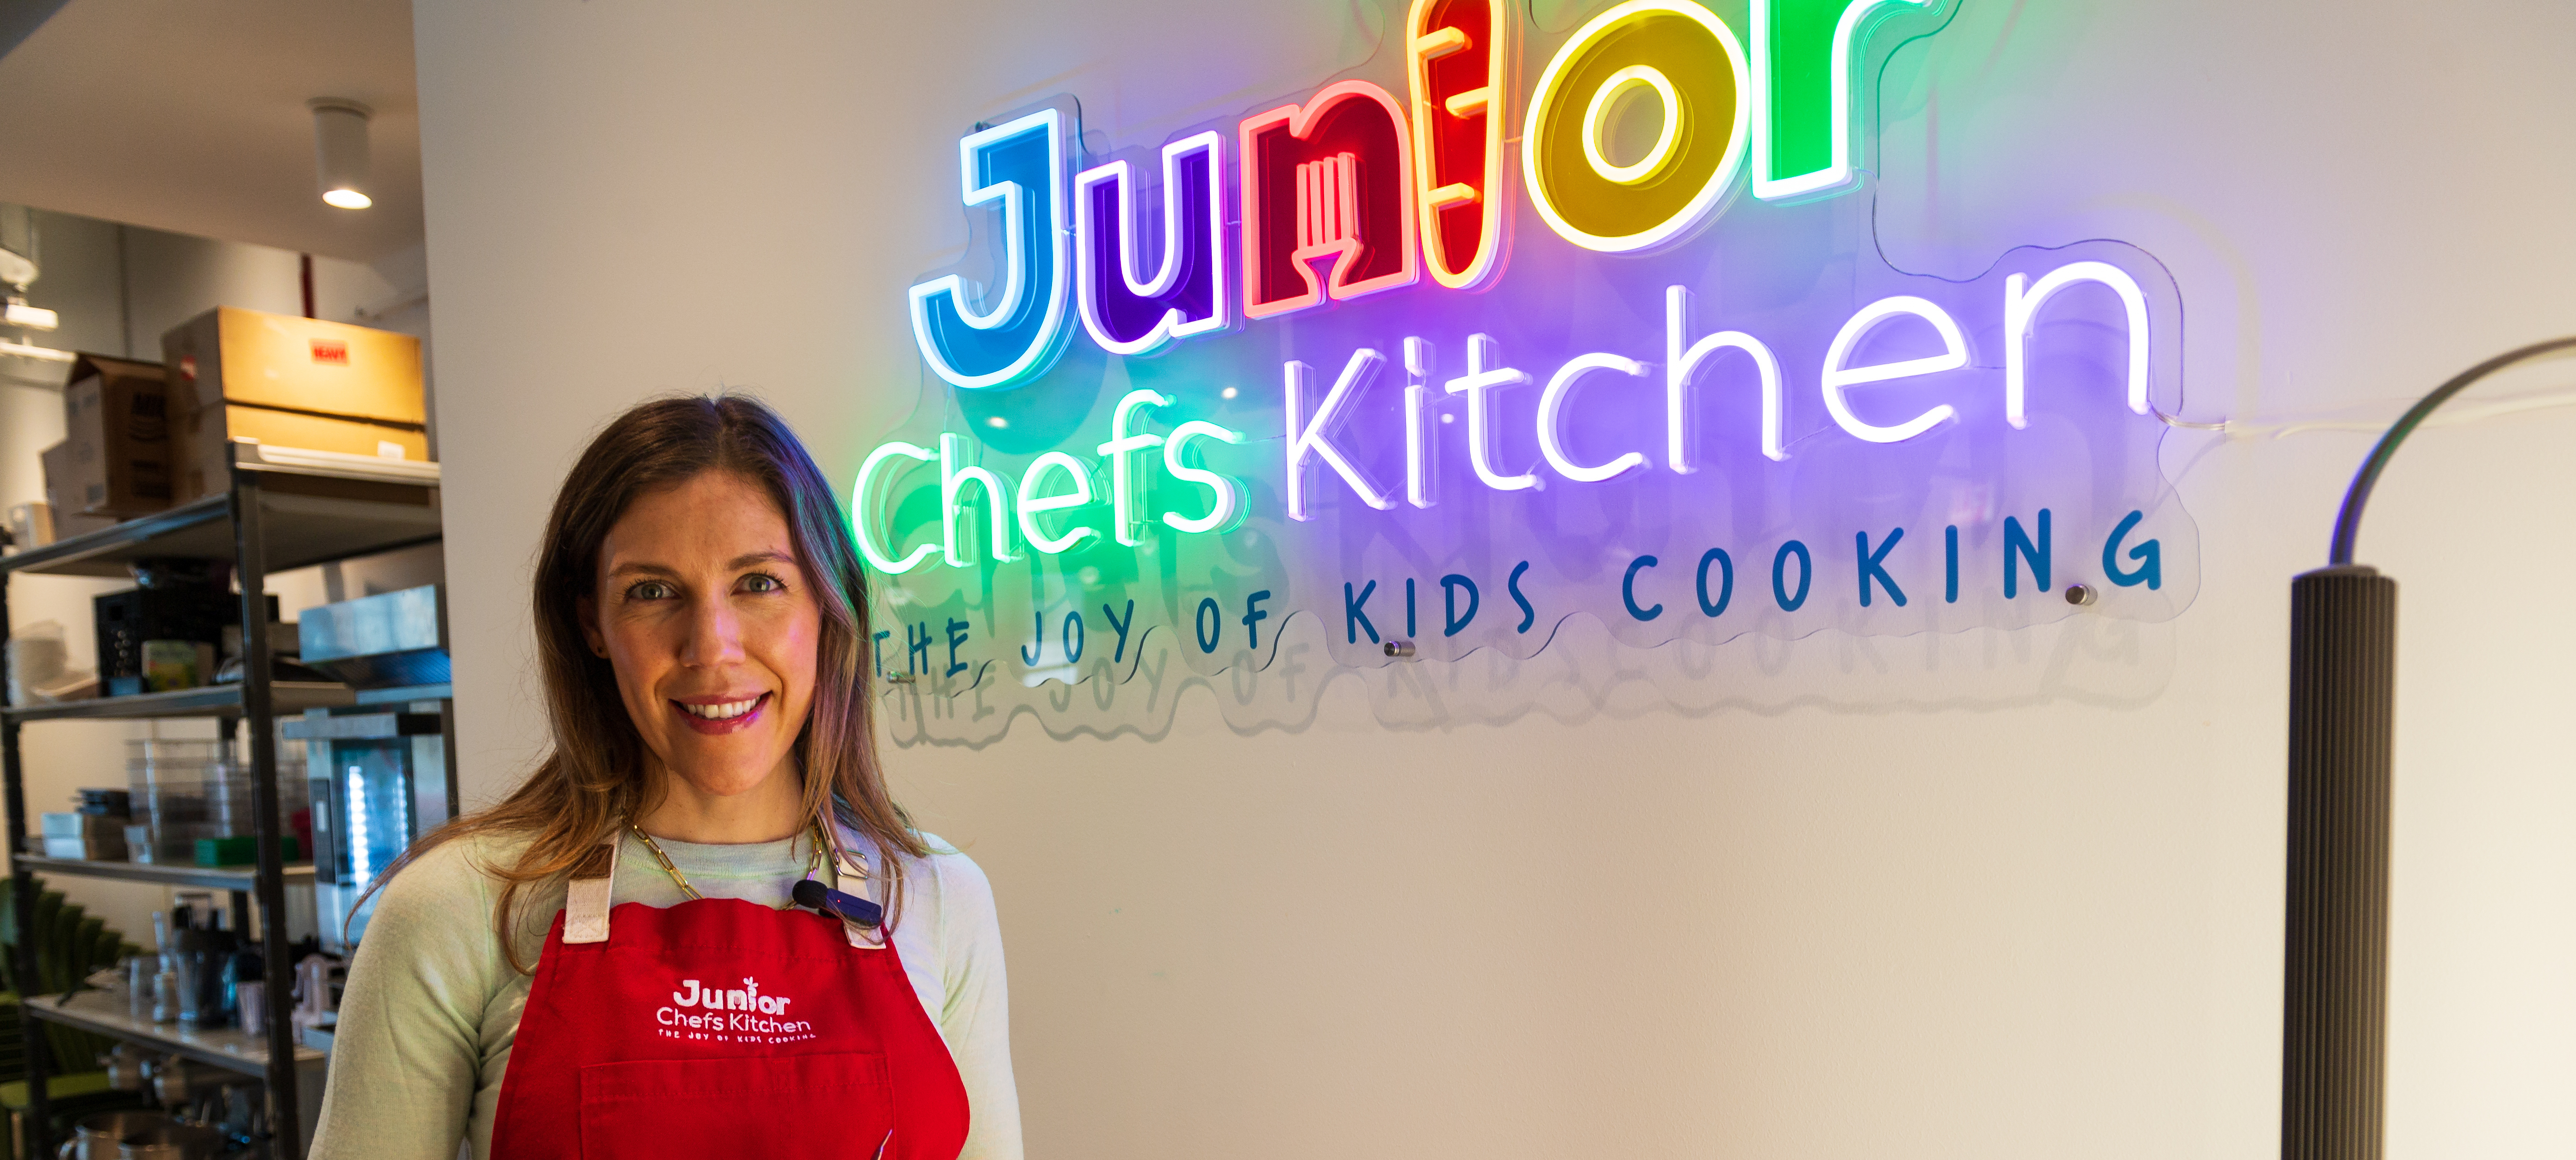 Owner Niki Cordell with sign for Junior Chefs Kitchen 